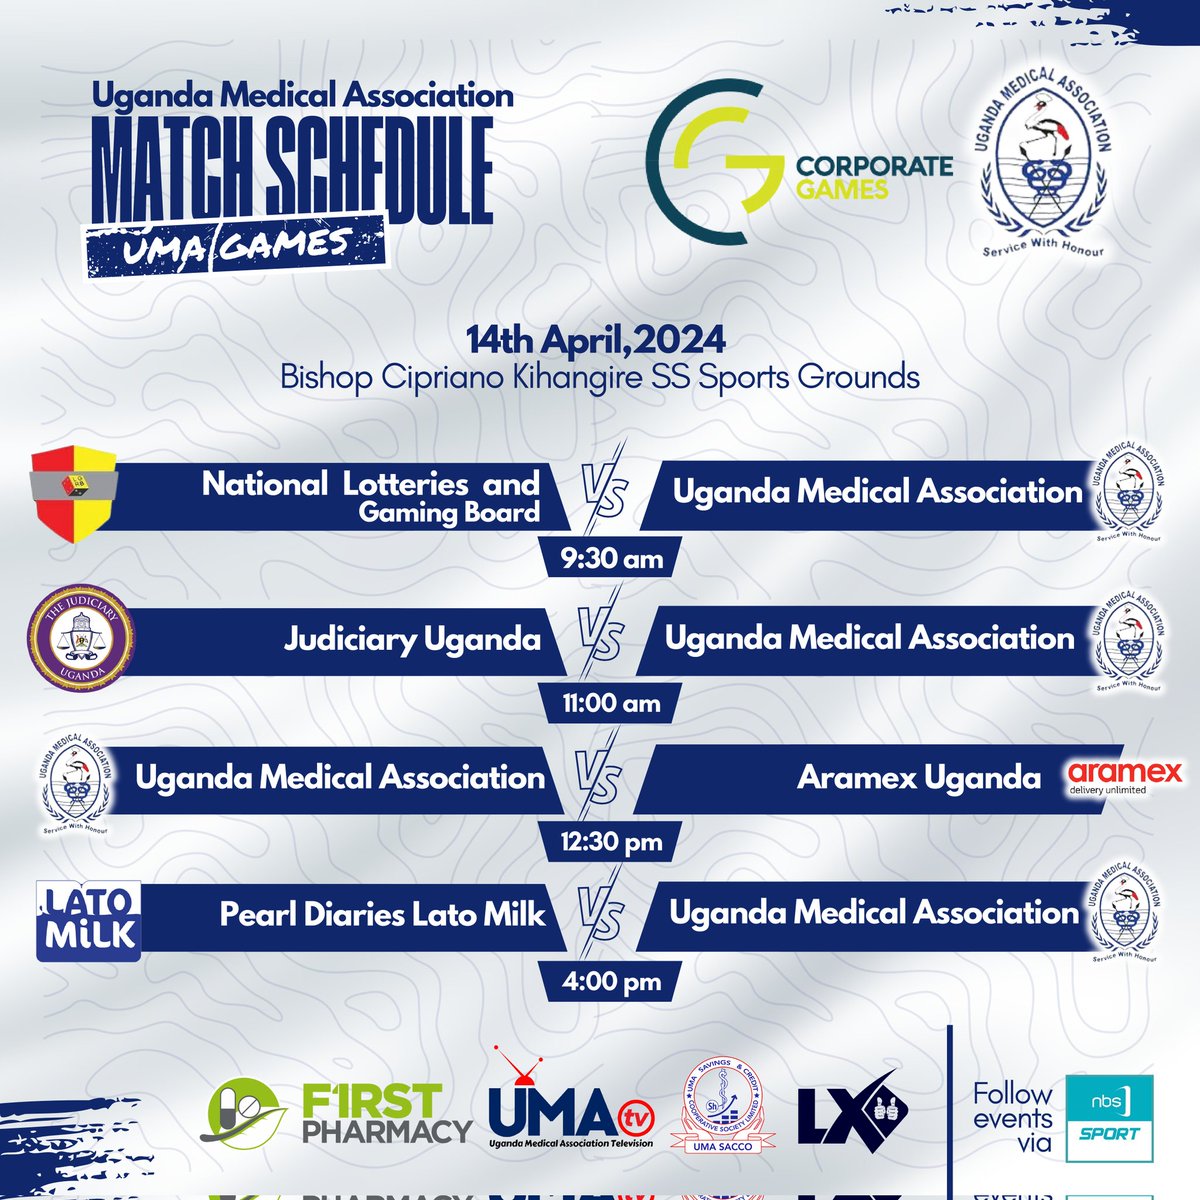 Here are our Football Fixtures for the upcoming 2nd outing of the @CorporateGamesU at Dove Stadium See you there #CorporateGamesUg @FirstPharmacy_